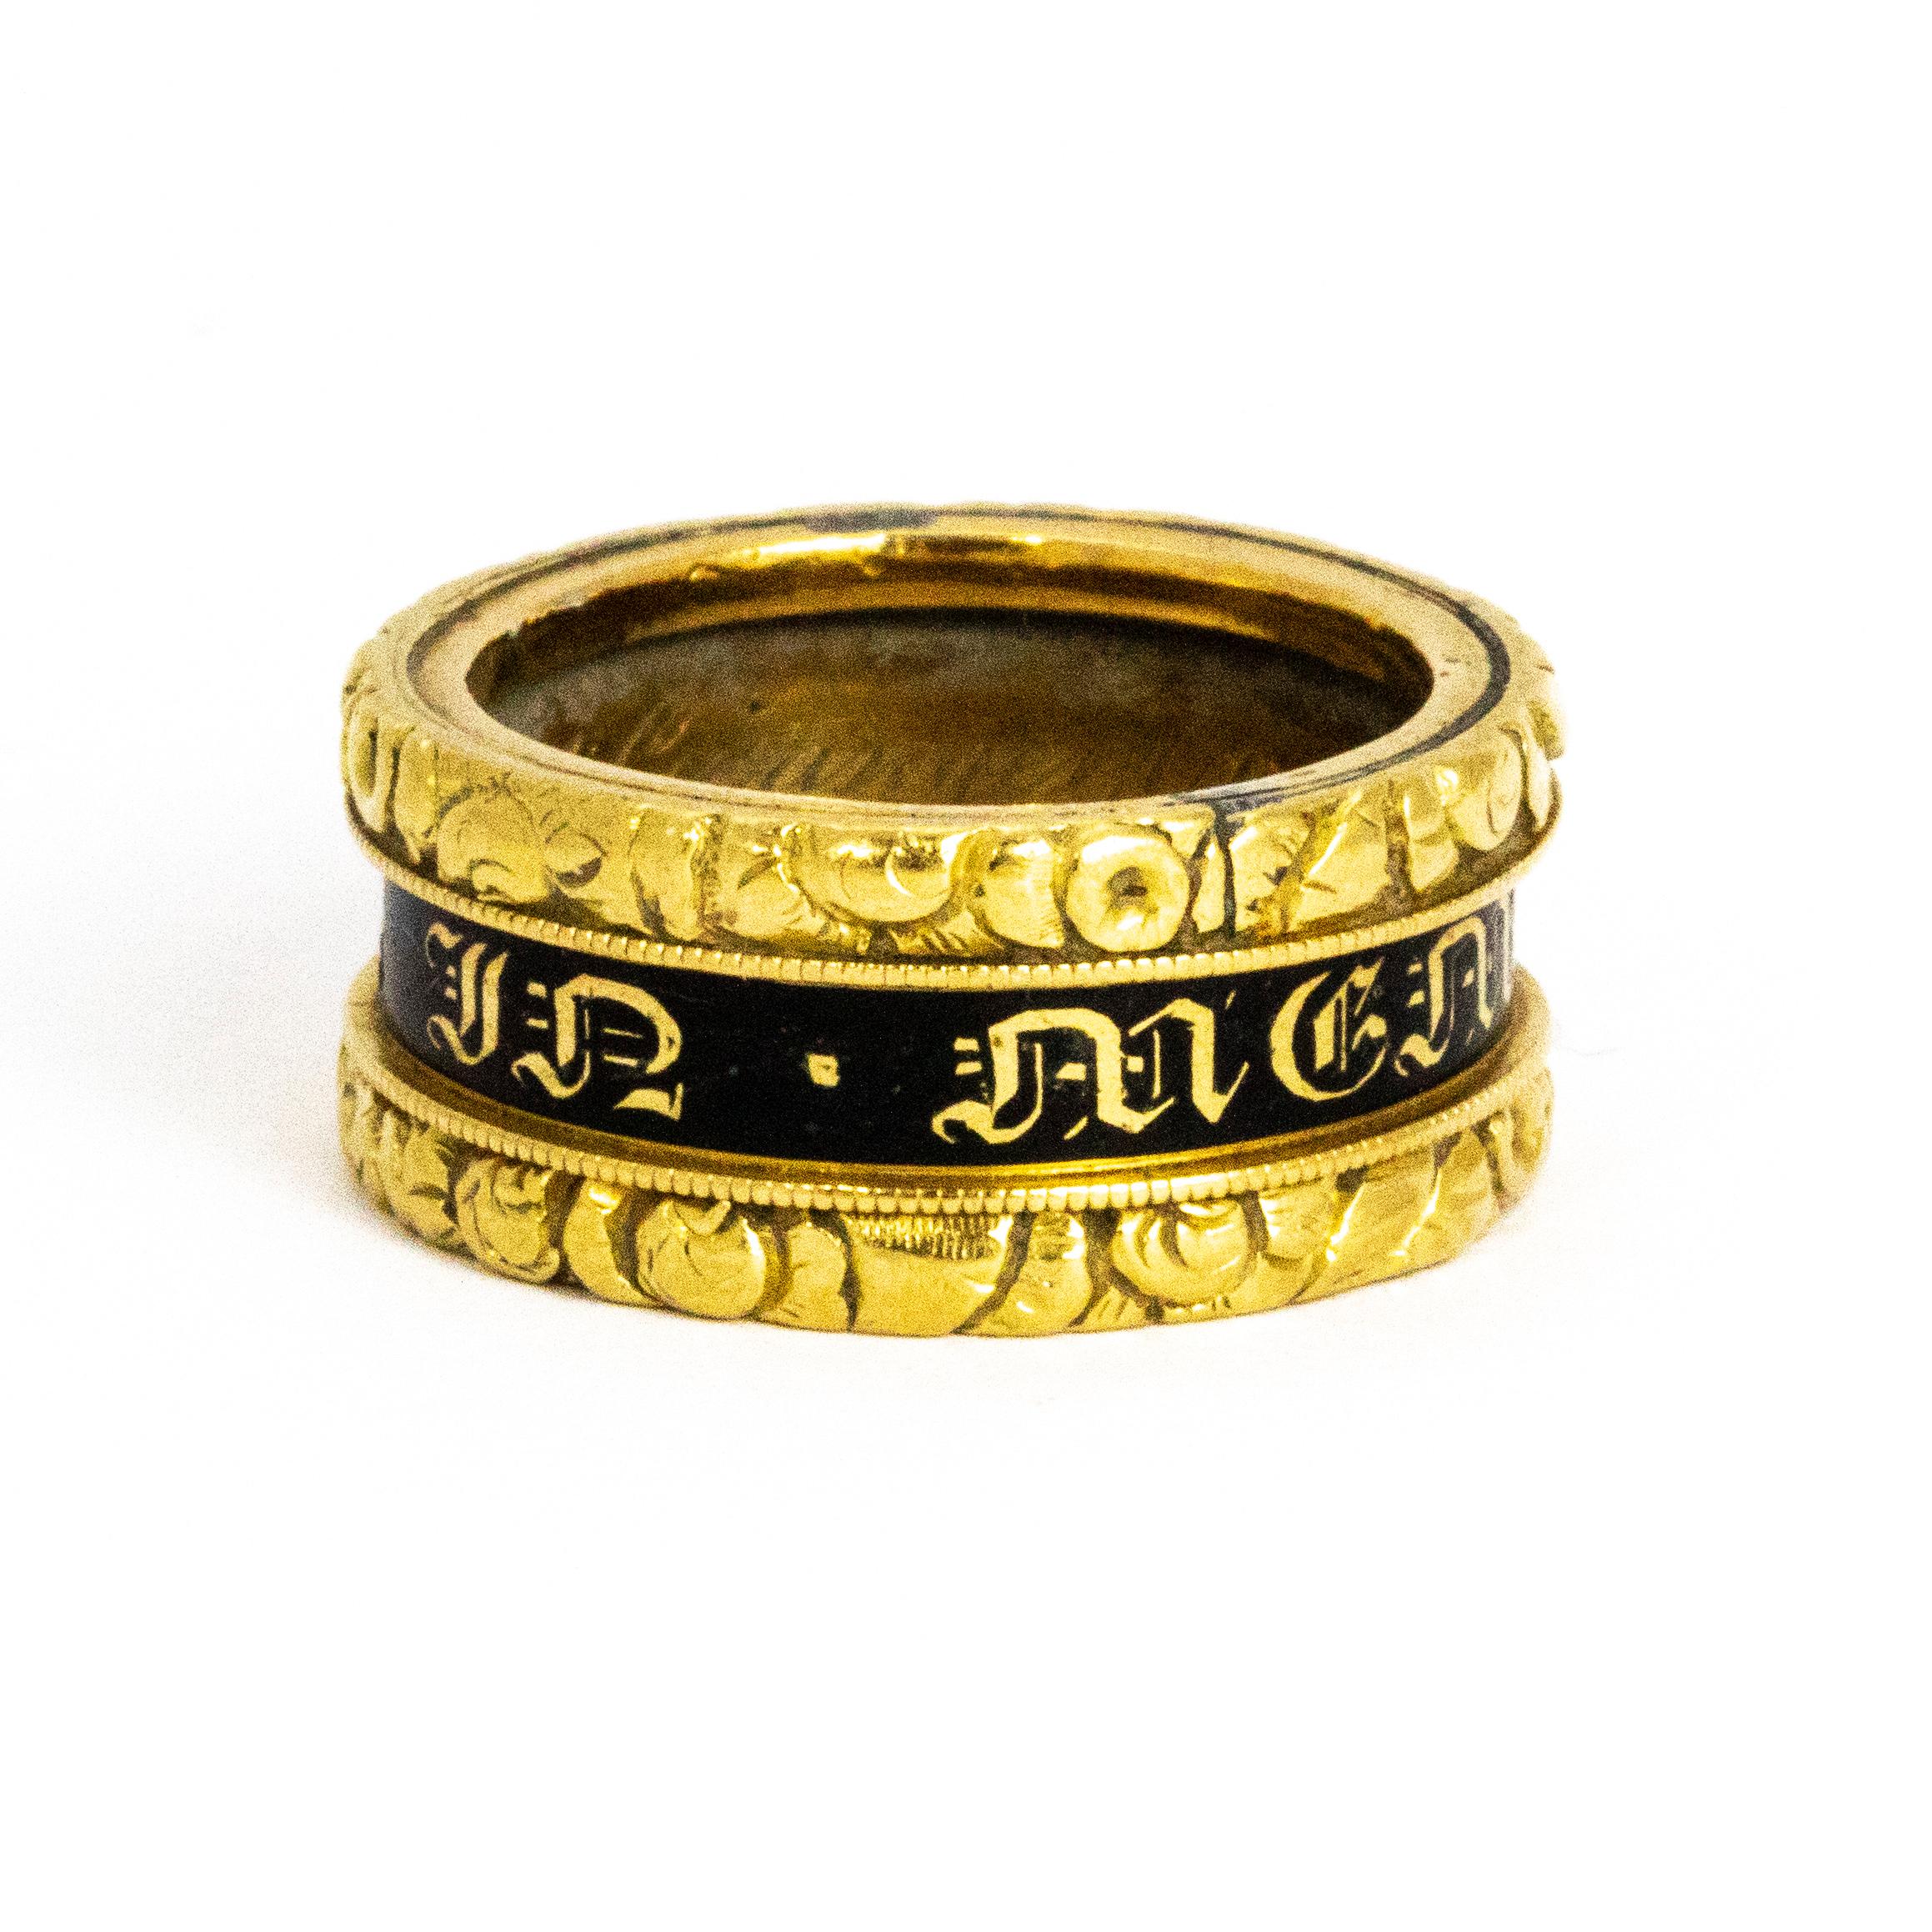 This stunning mourning ring has so much going on! On the outer of the ring there is a black enamel strip that flows around the whole band reading 'In Memory Of' and there are also two engraved gold bands that sandwich the black enamel. The